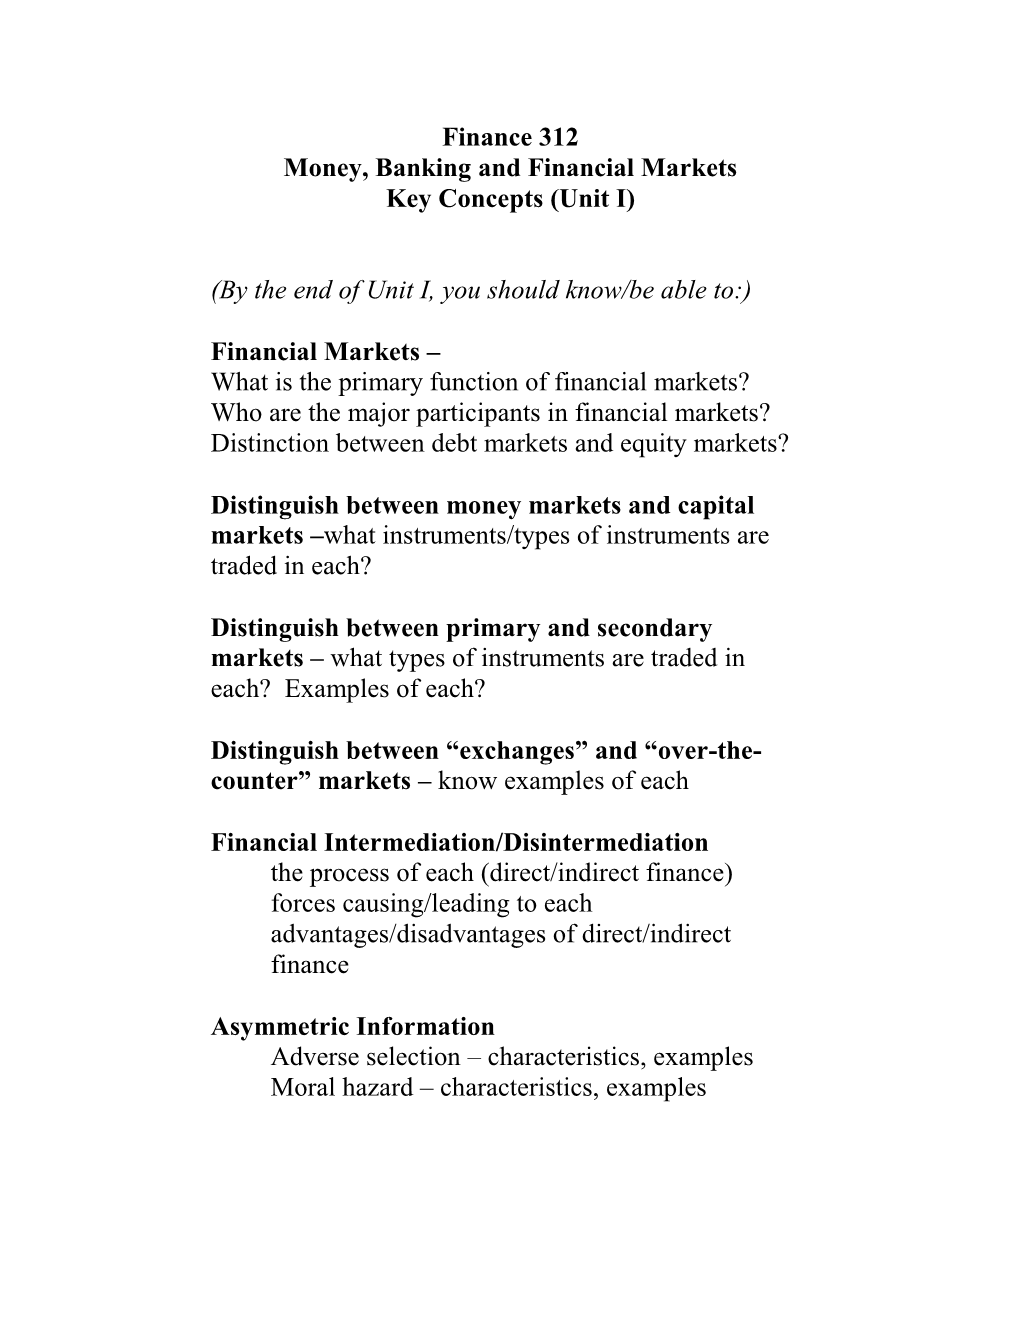 Finance 312 Money, Banking and Financial Markets Key Concepts (Unit I)